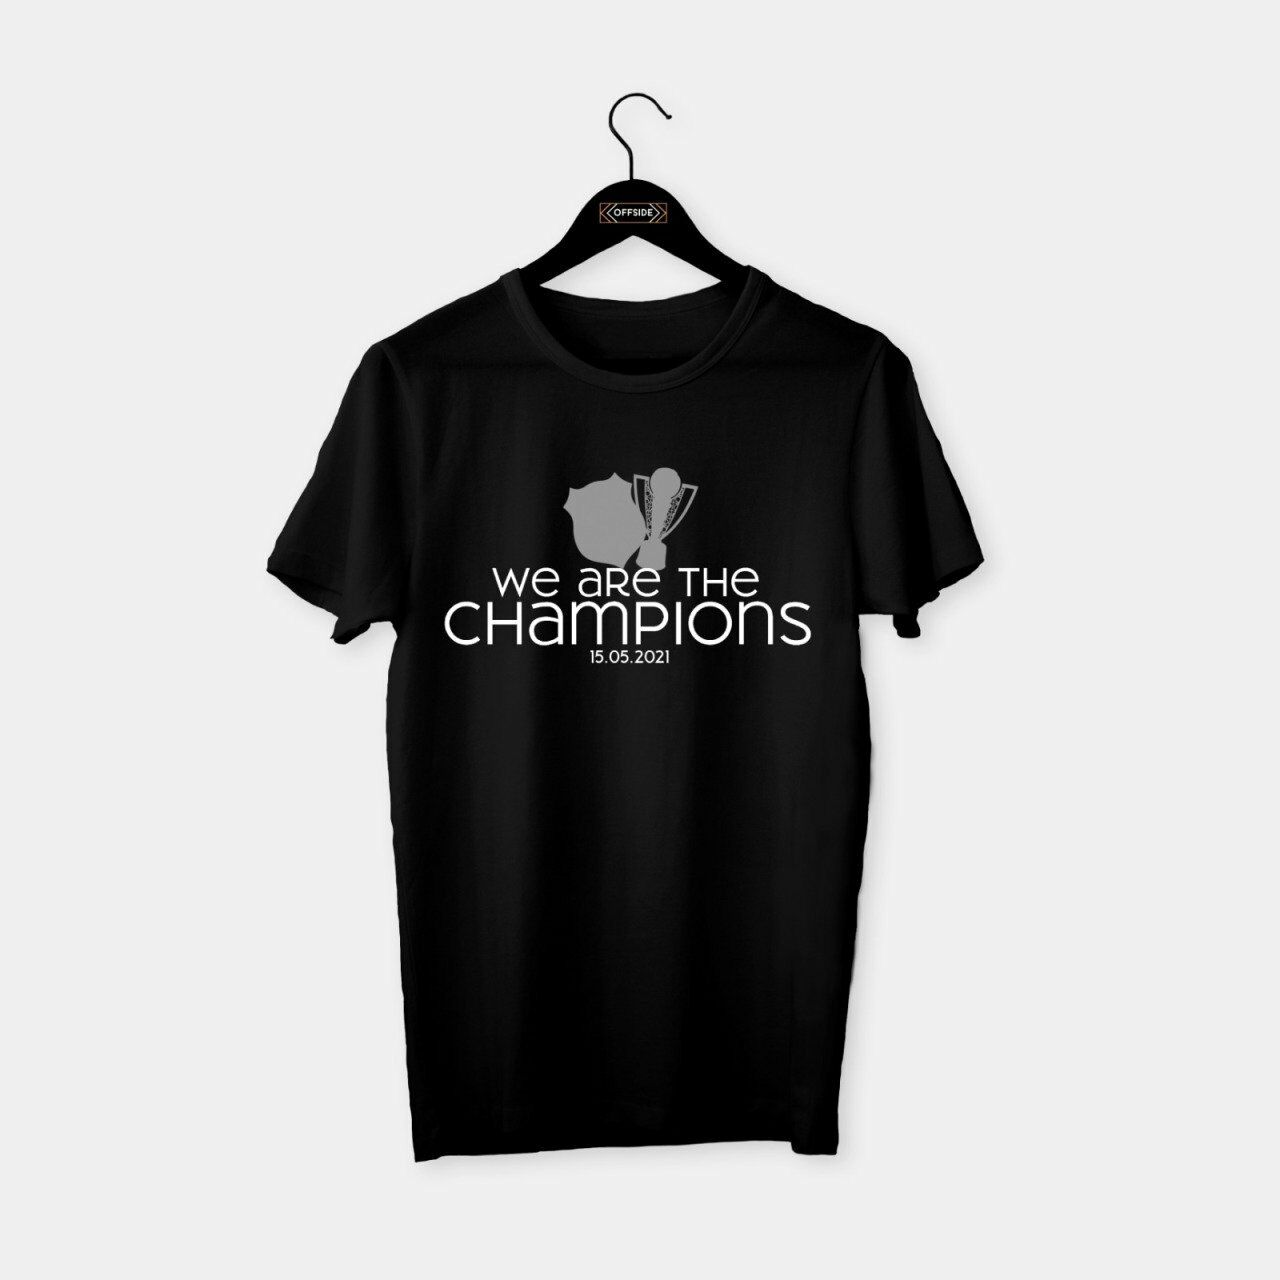 We are the Champions T-shirt